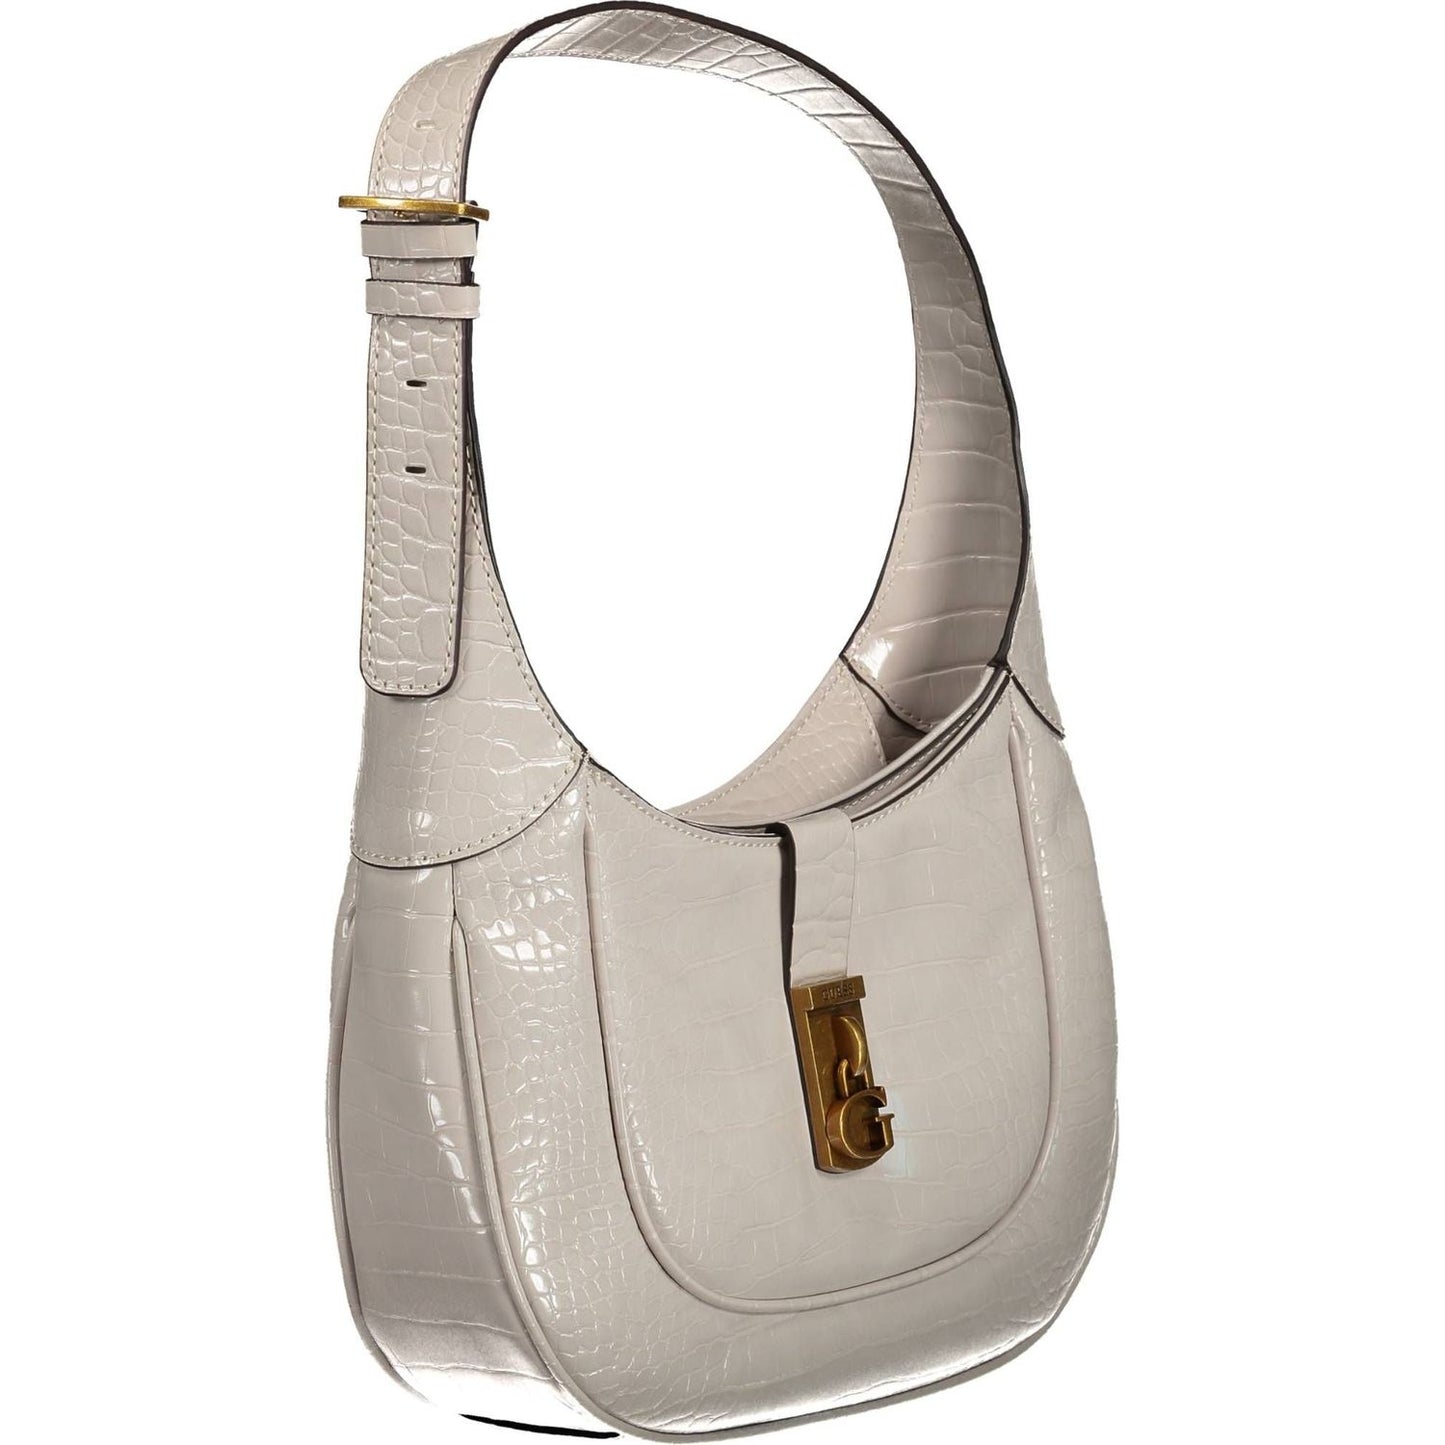 Guess Jeans Chic Gray Shoulder Bag with Contrasting Details chic-gray-shoulder-bag-with-contrasting-details